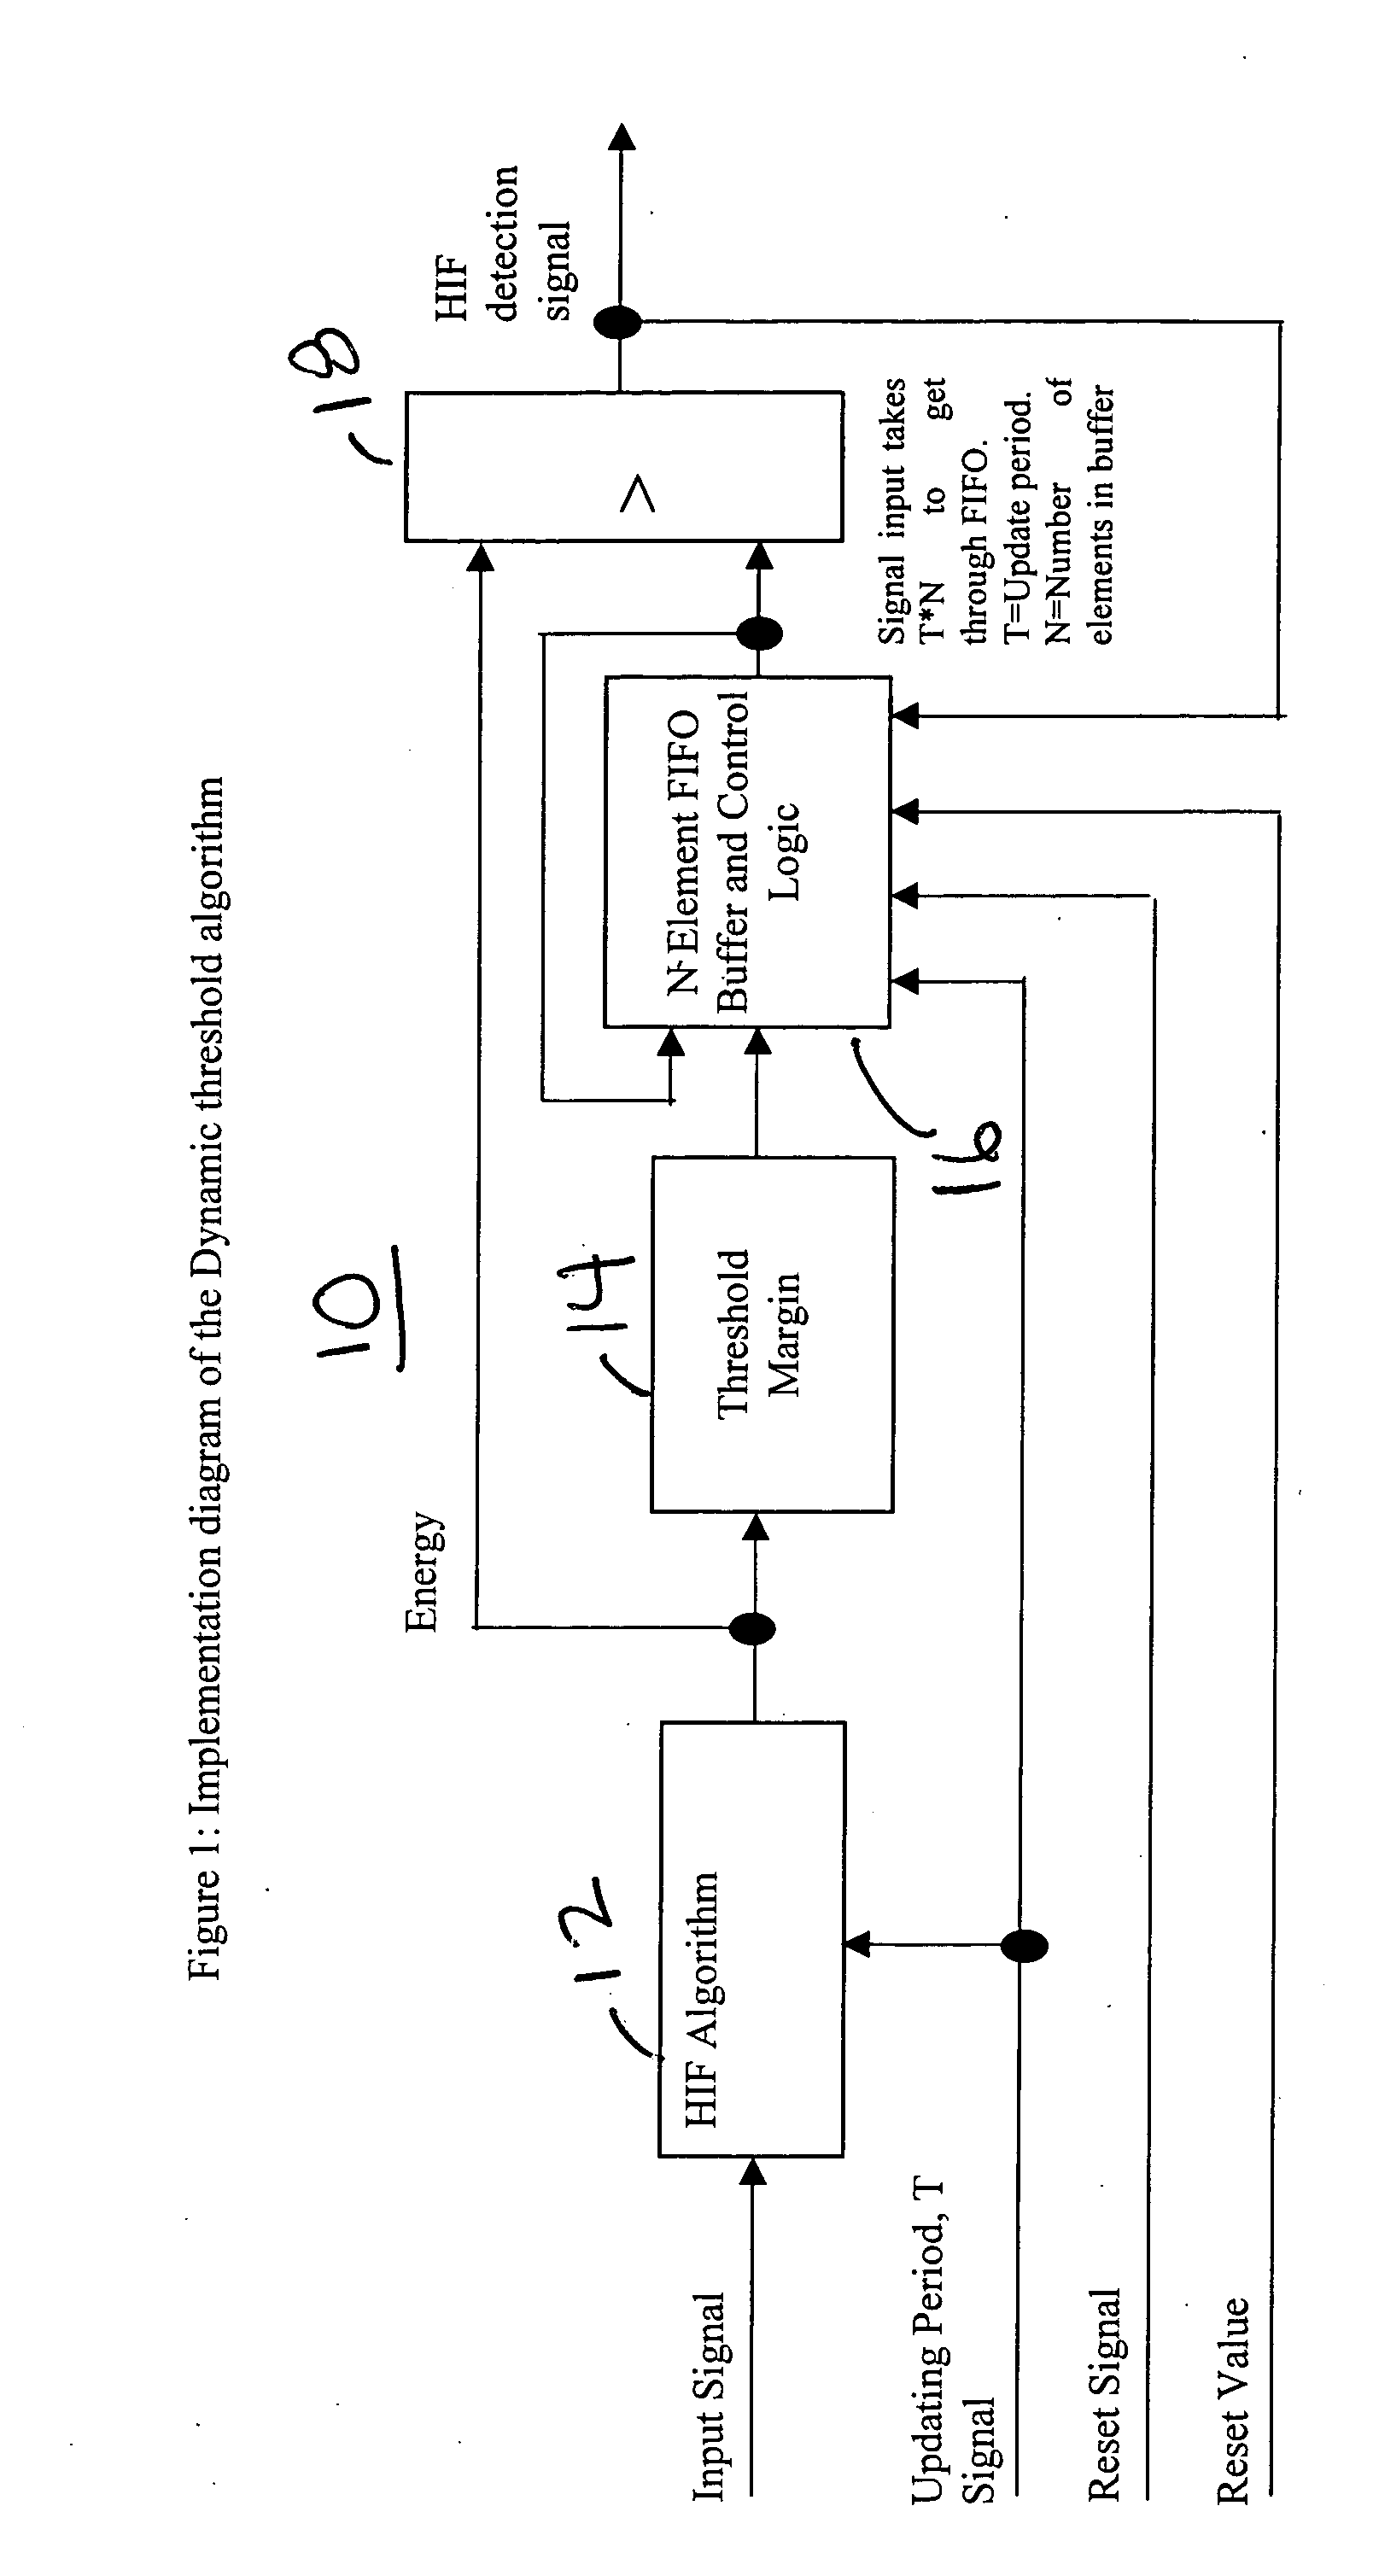 Dynamic energy threshold calculation for high impedance fault detection